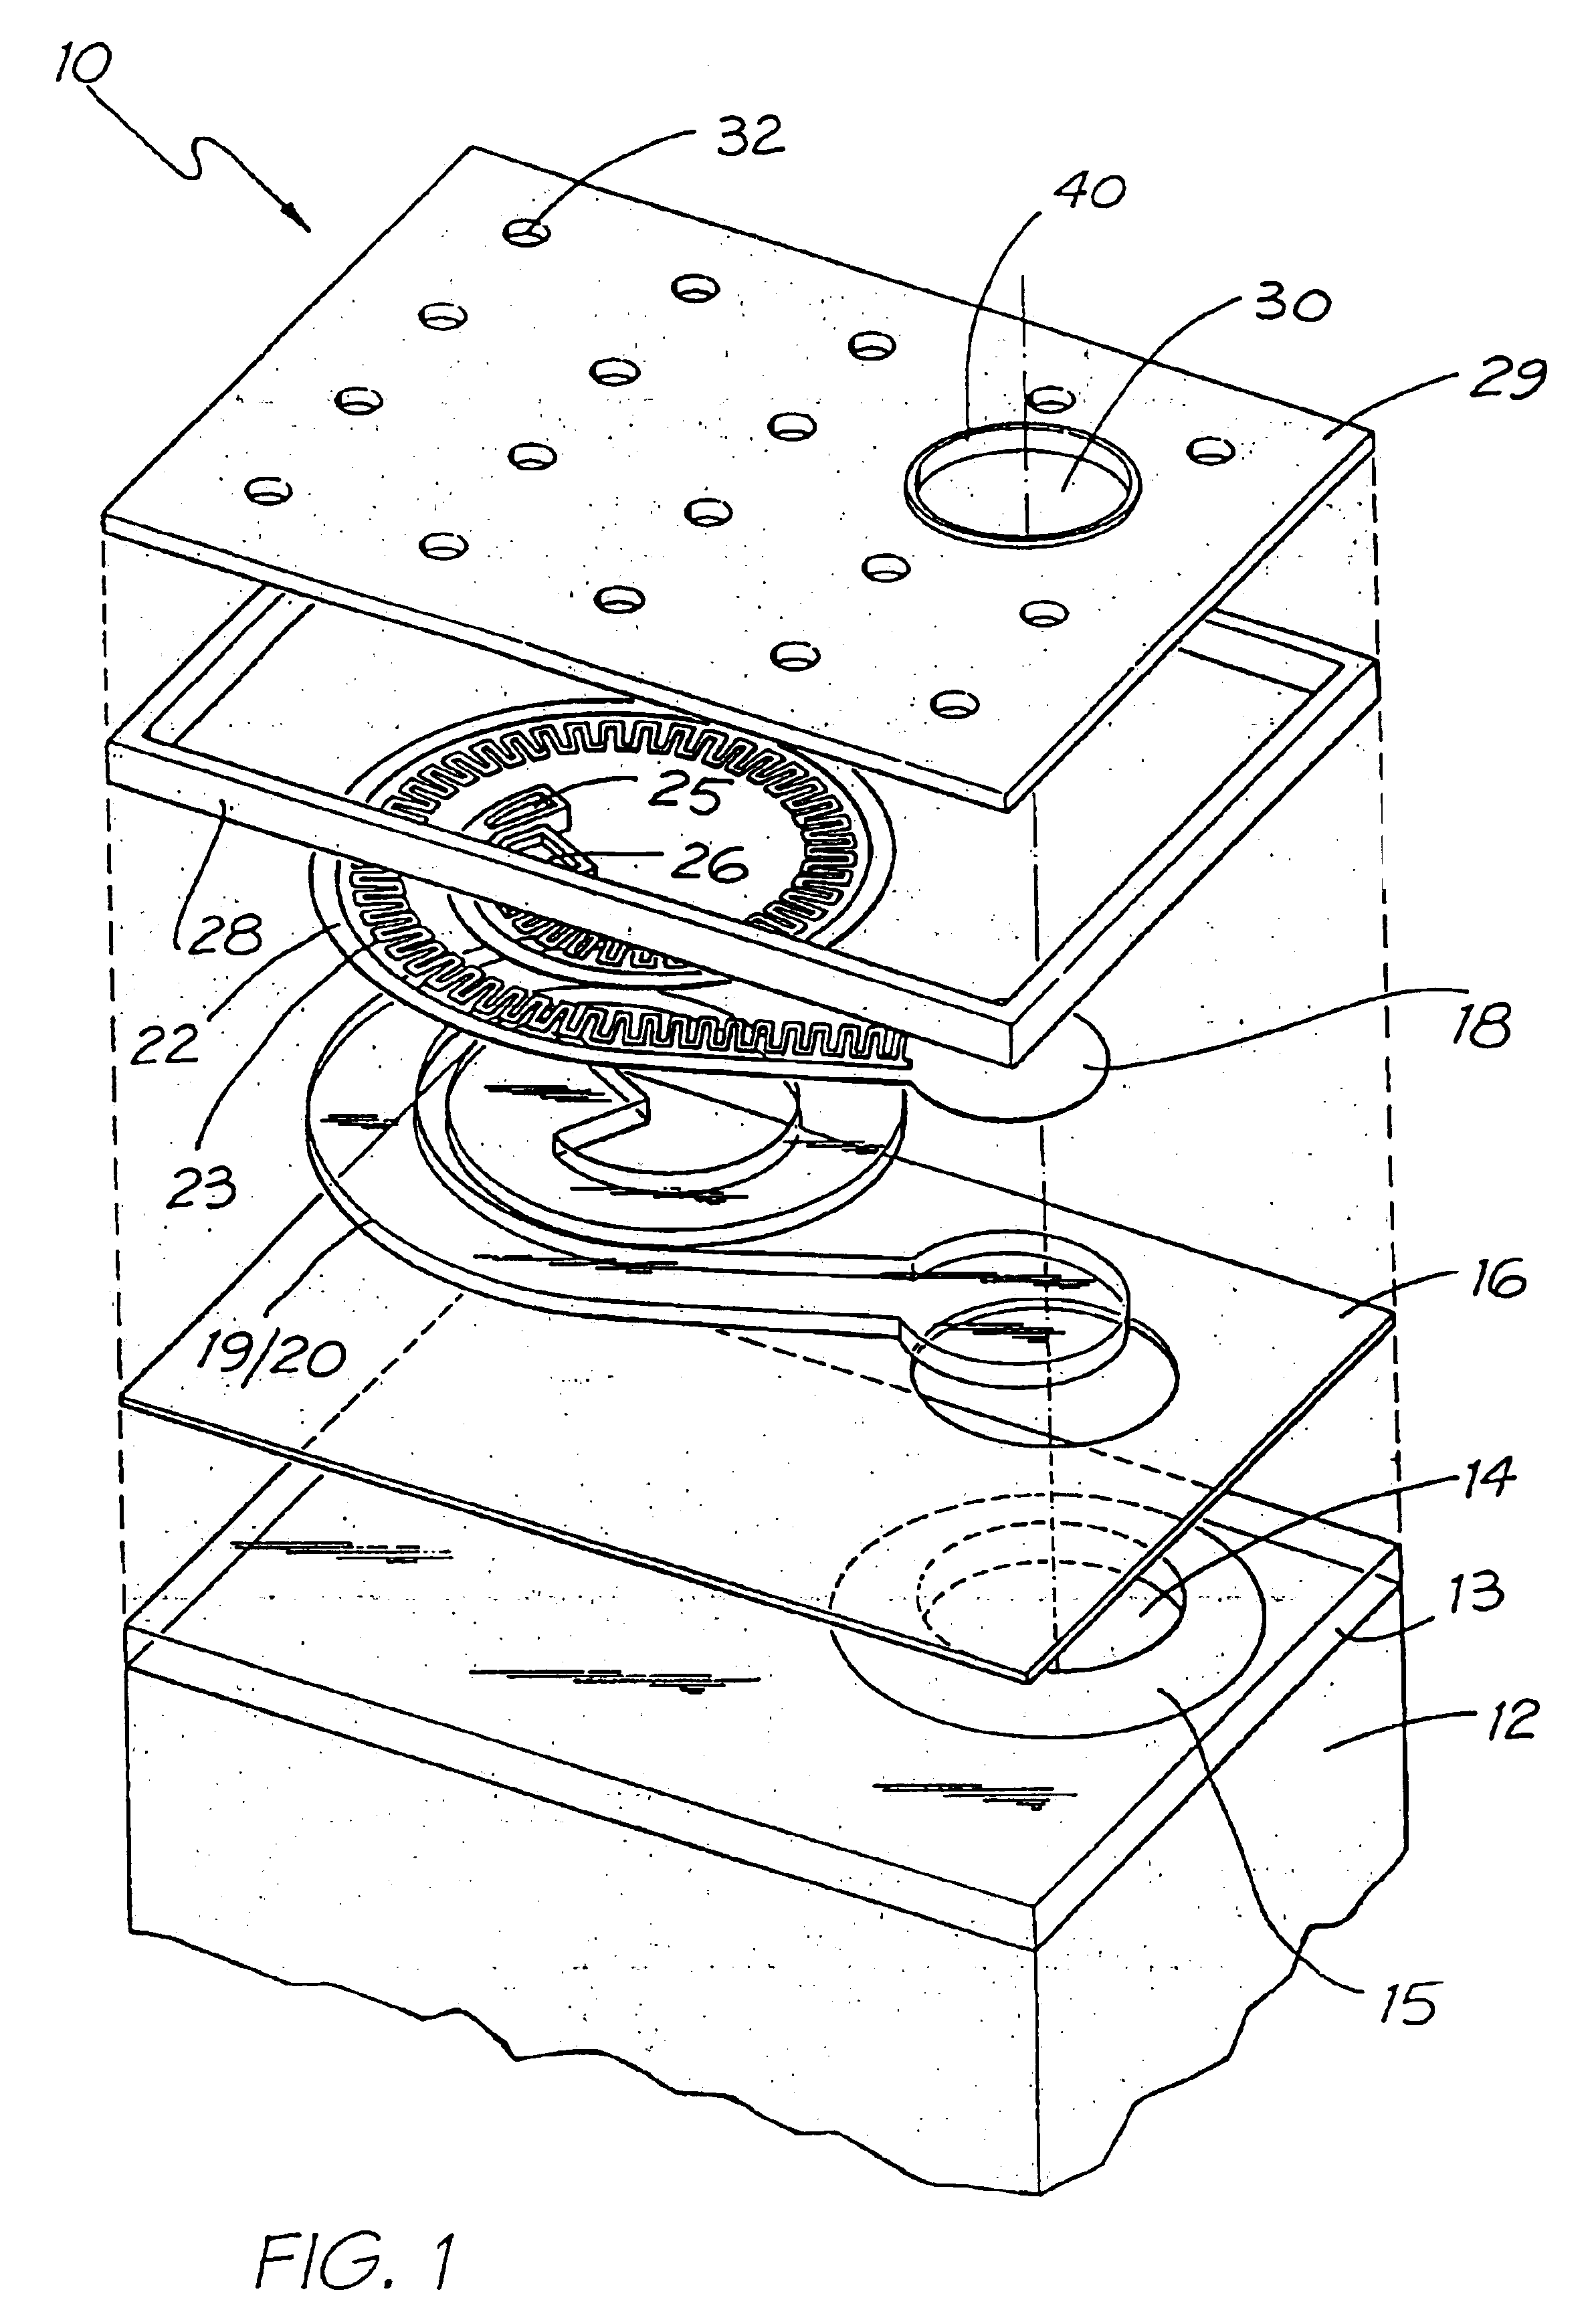 Inkjet printhead chip for use with a pulsating pressure ink supply